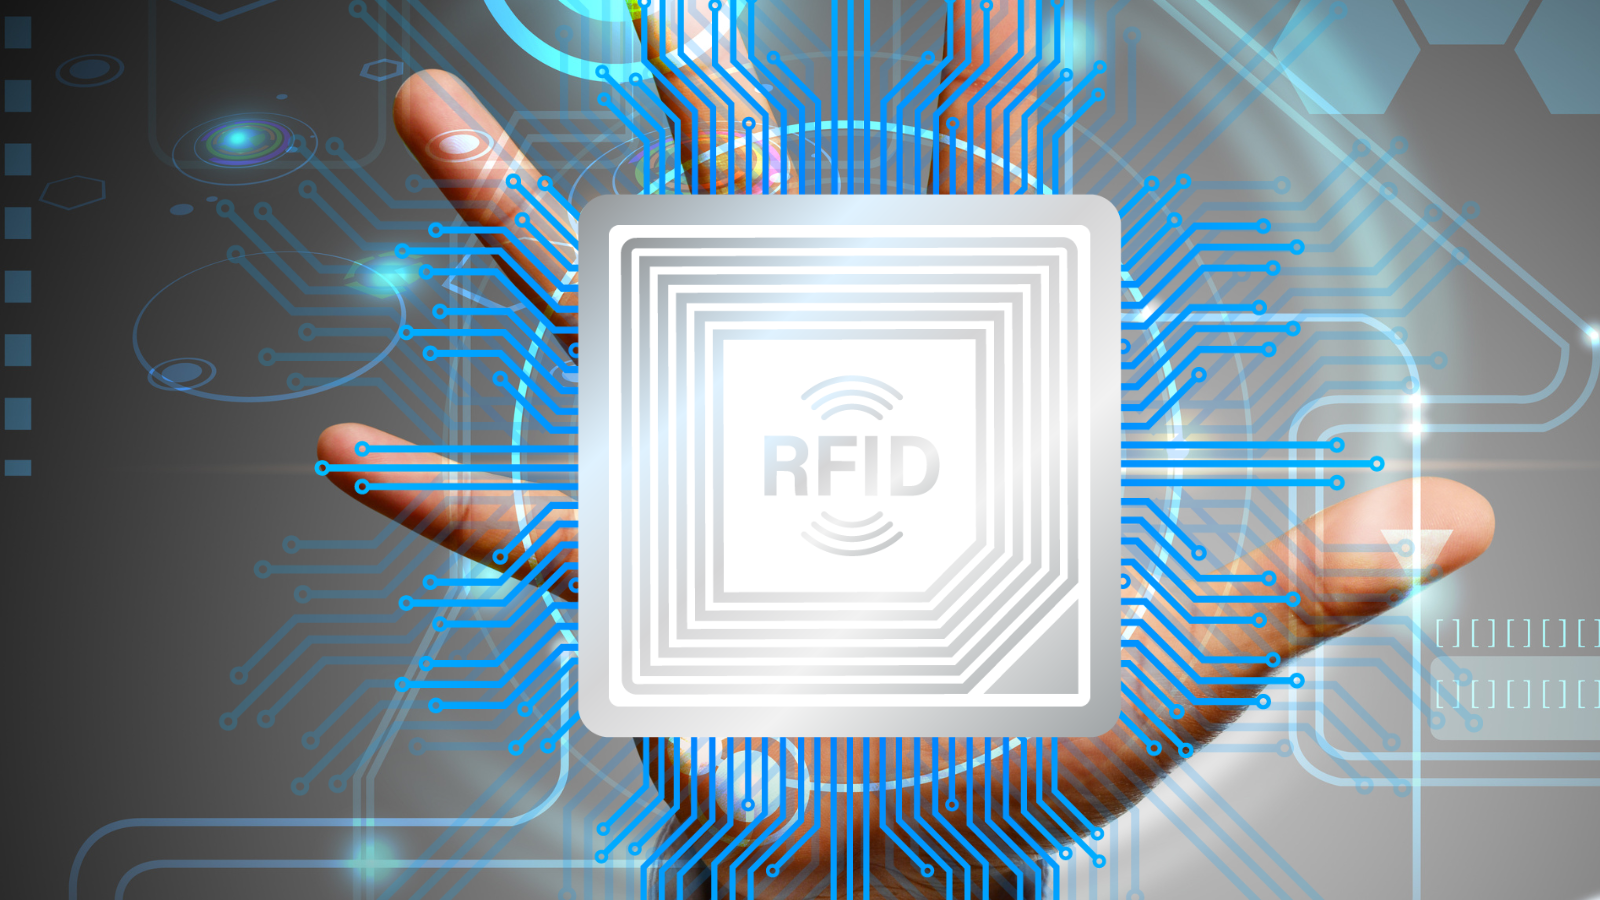 Why do you need RFID technology? 9 benefits of adopting RFID solutions.